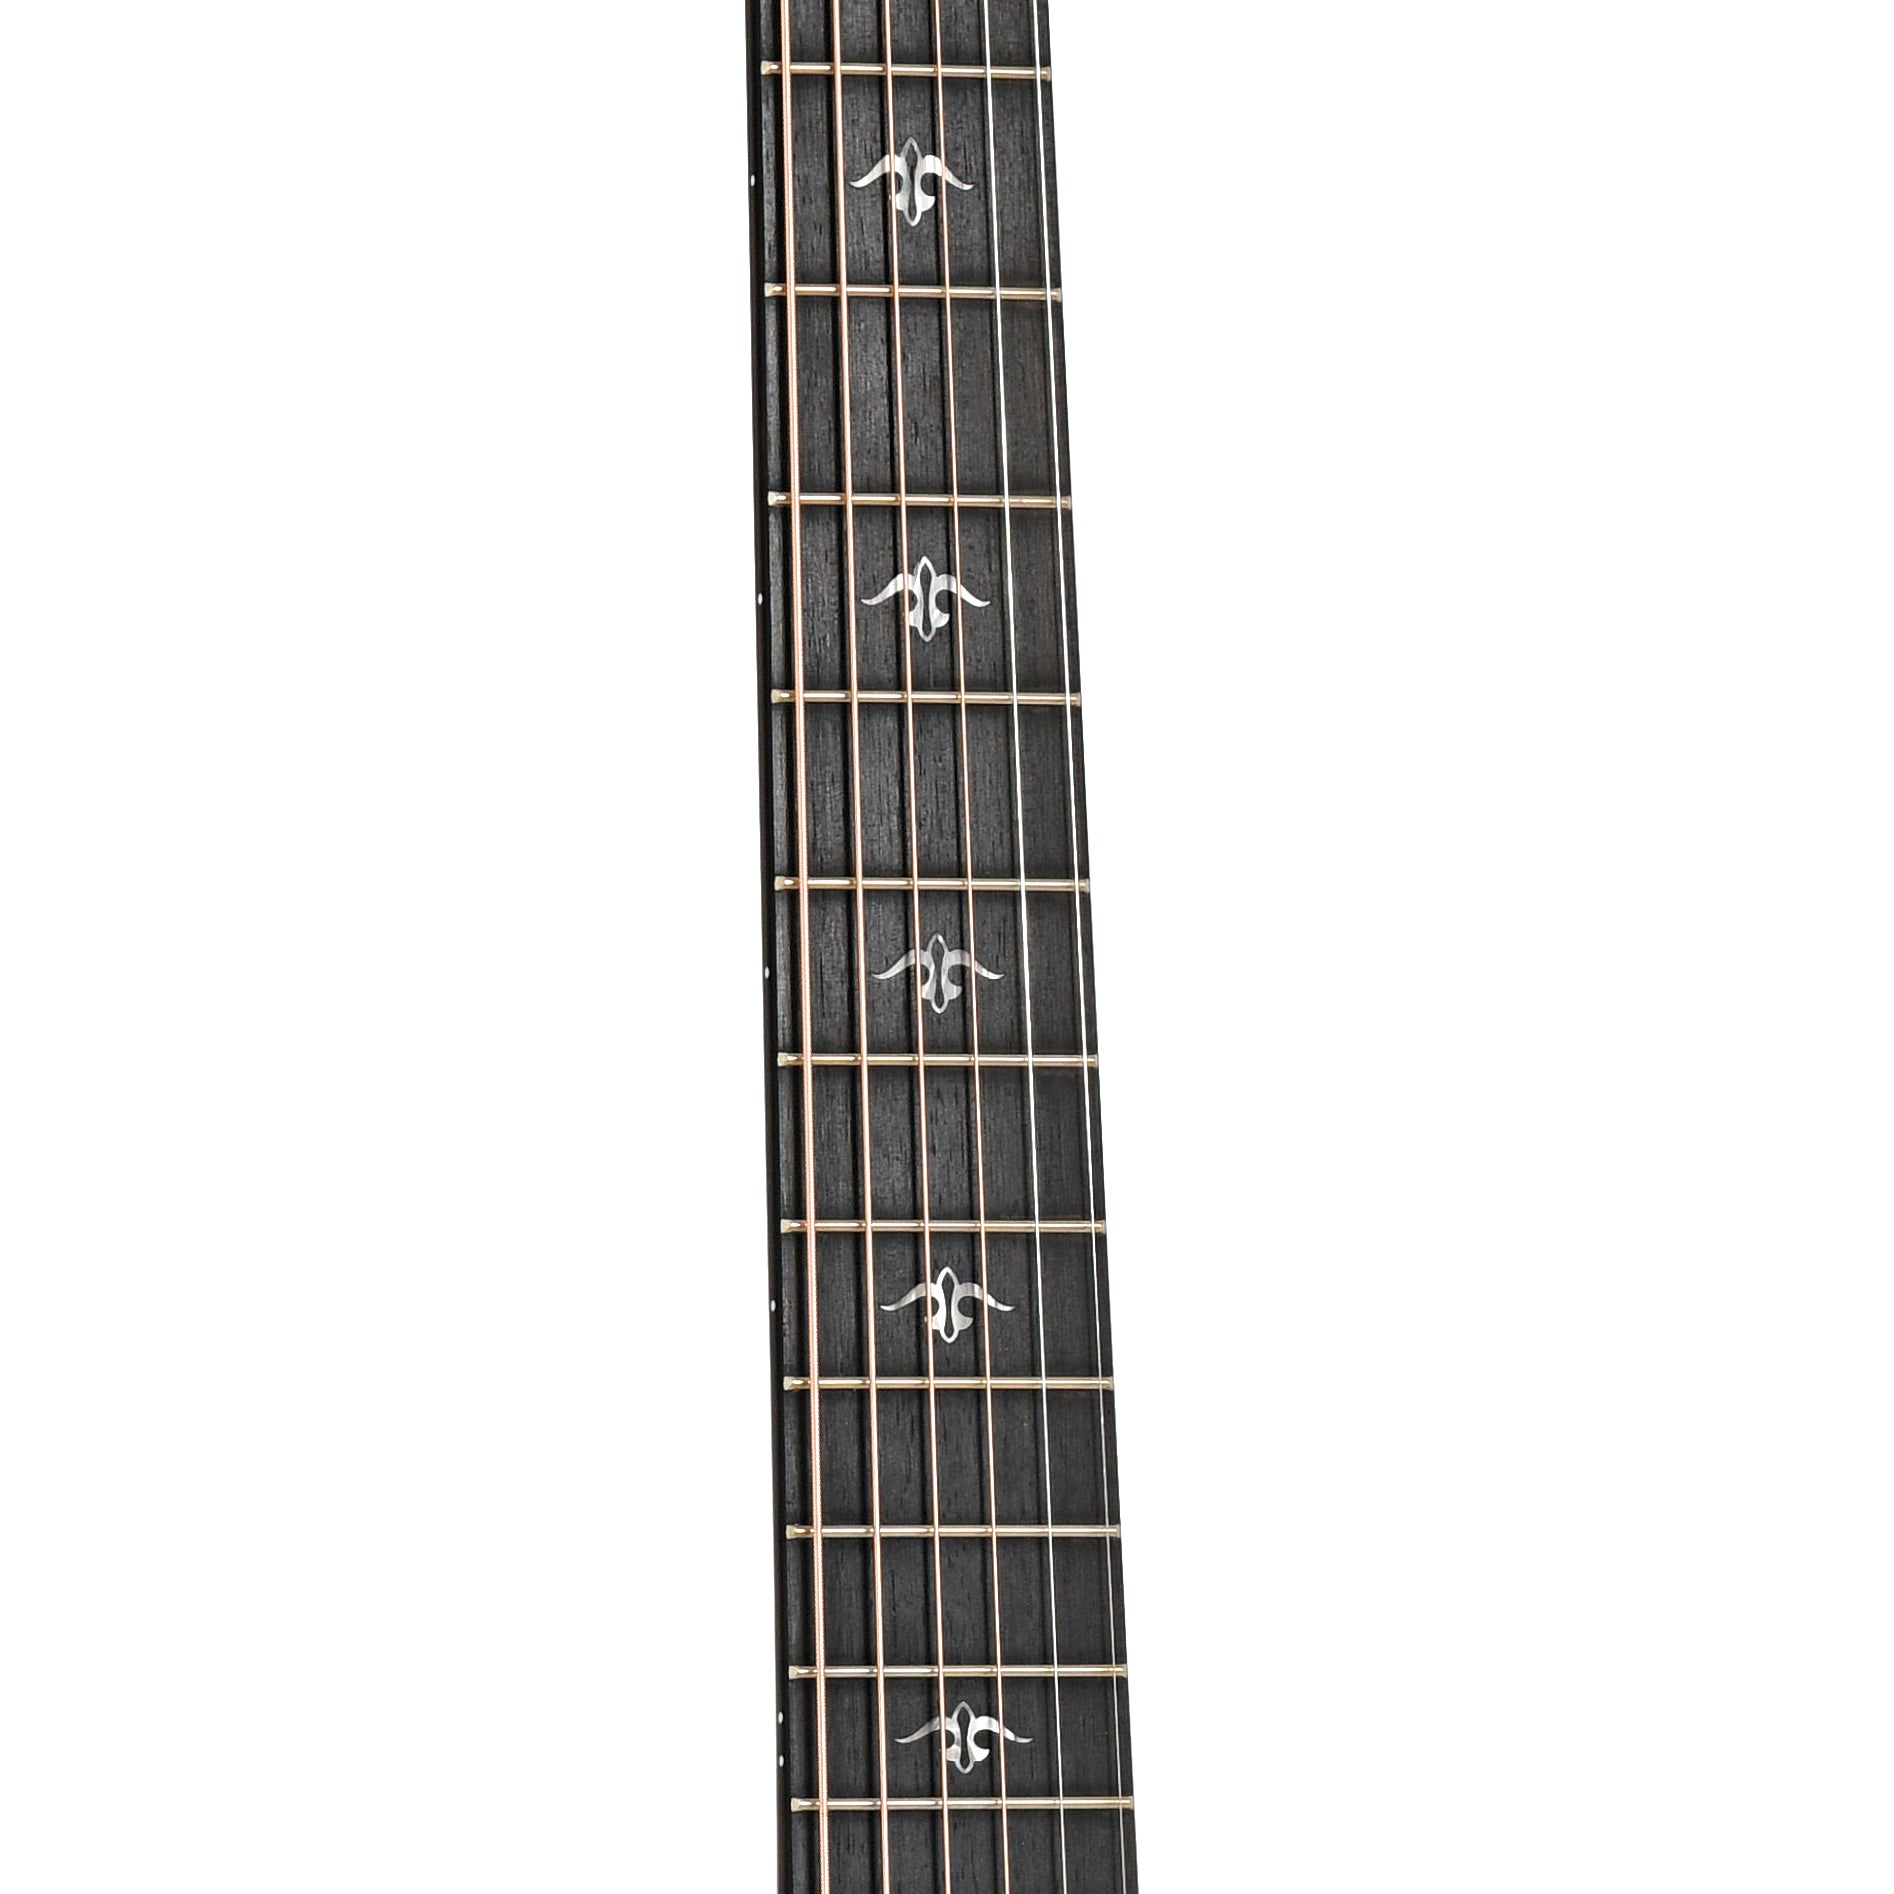 Fretboard of Taylor 514ce Acoustic Guitar 